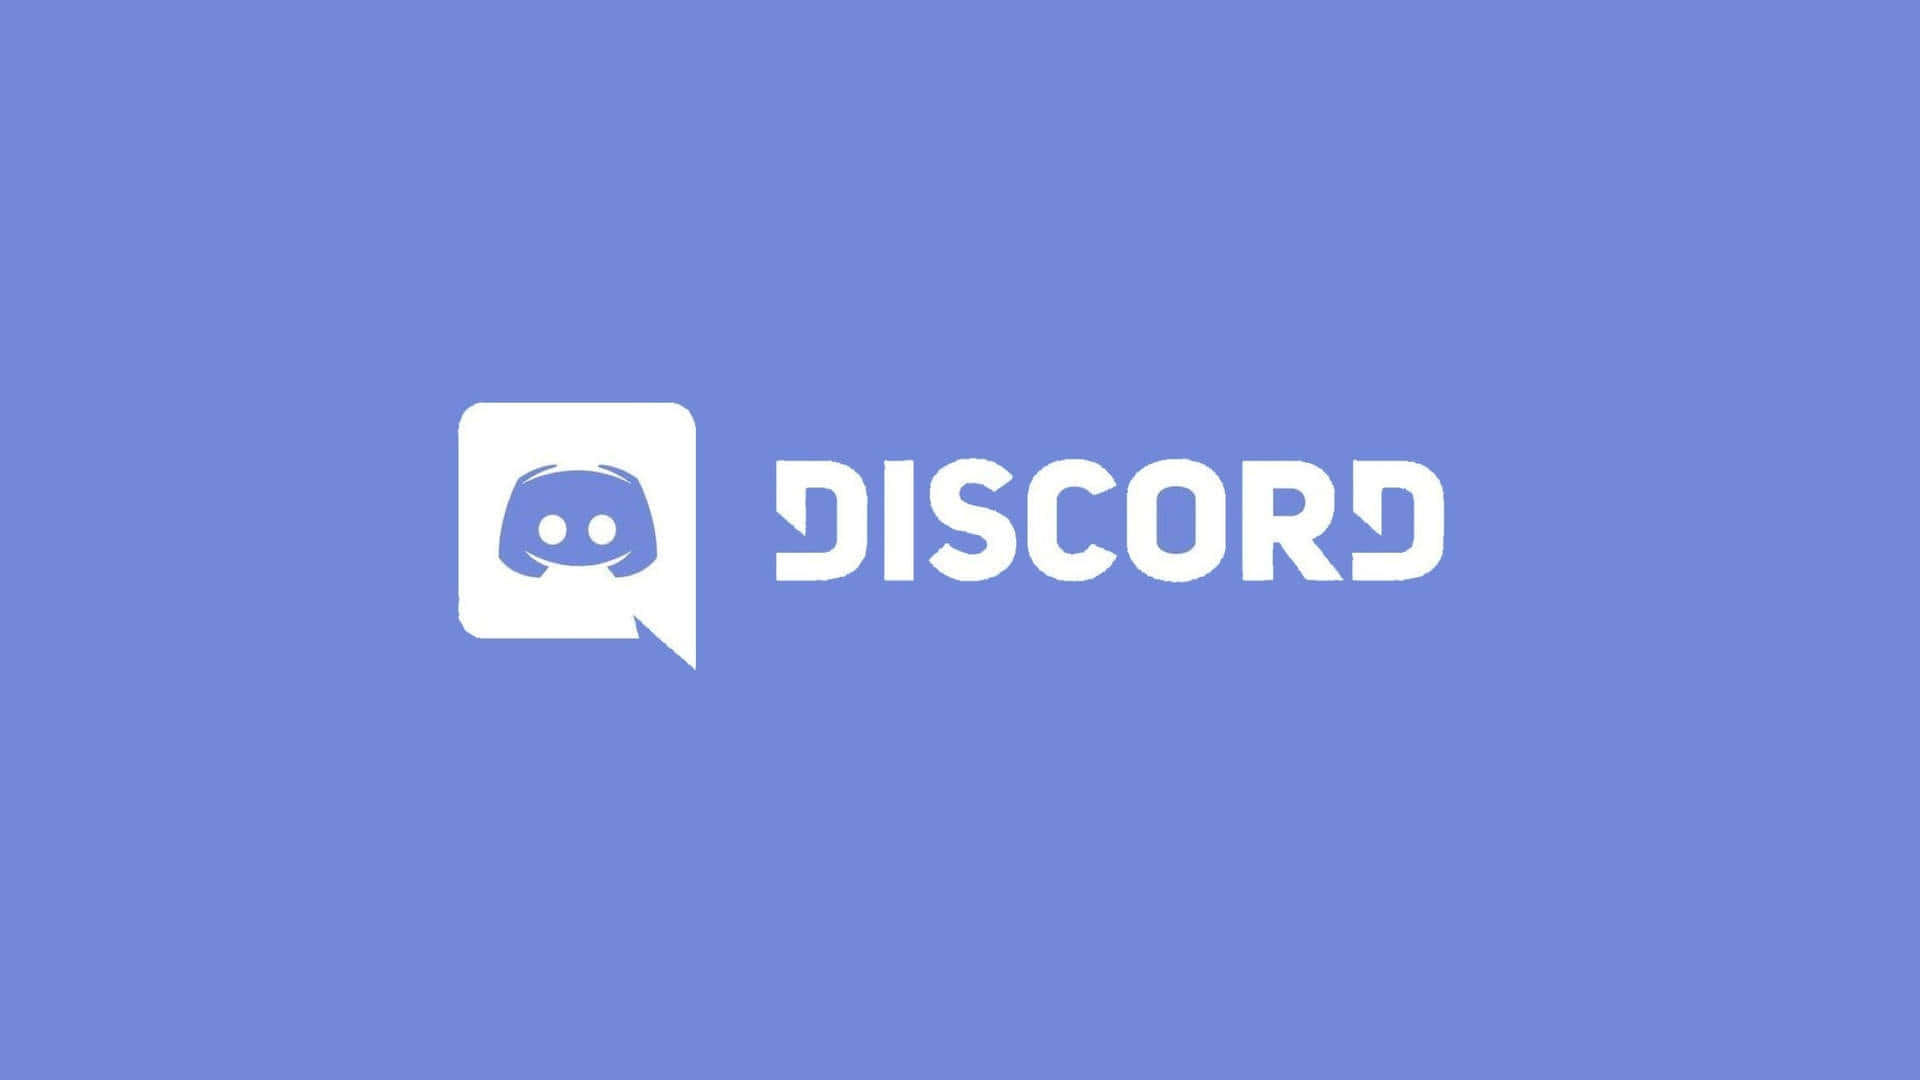 Discord - The Best Chat App For Chatting With Friends